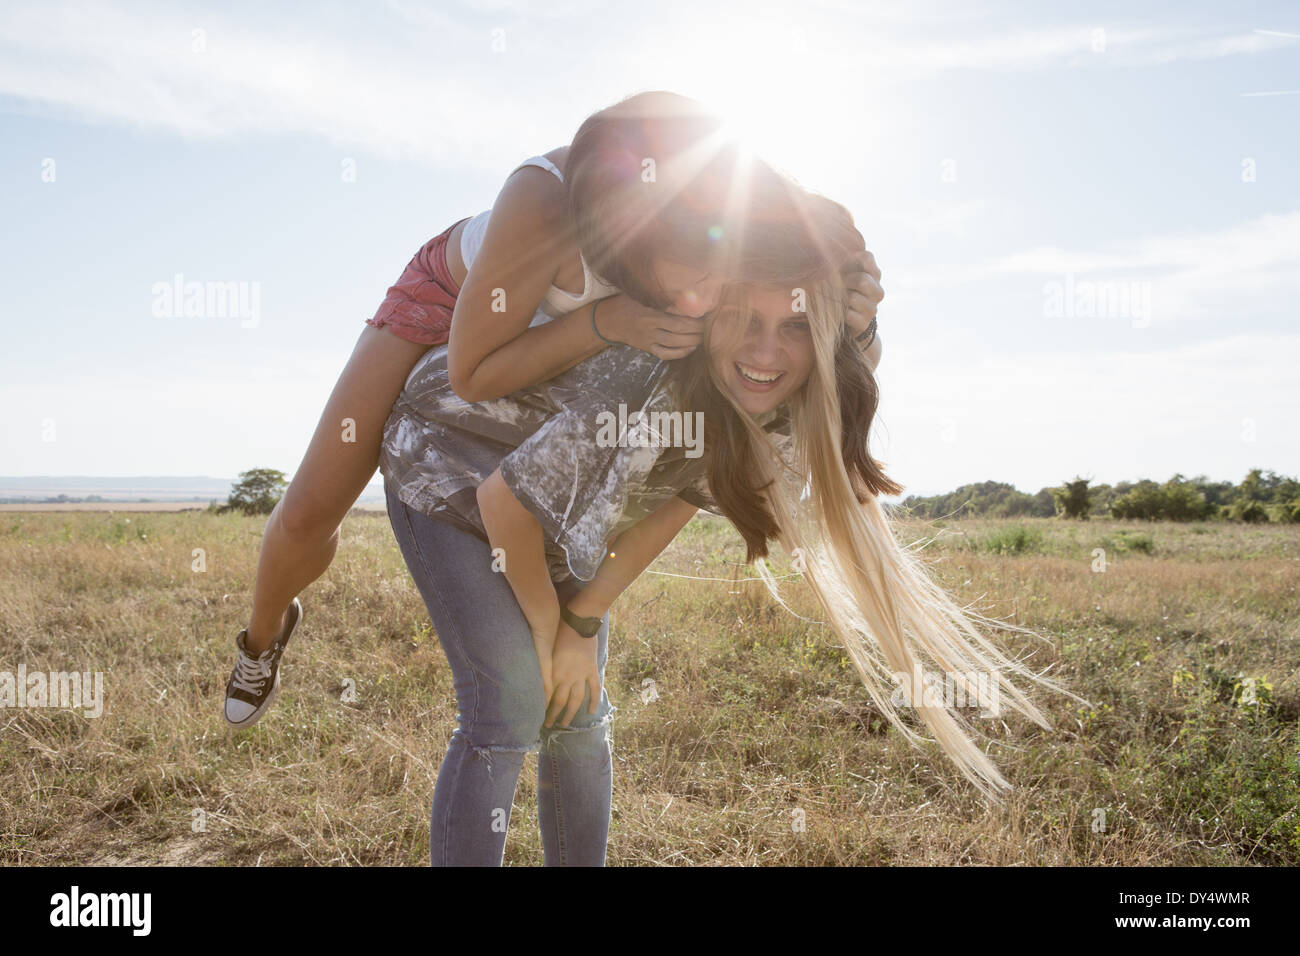 Young woman giving ami piggy back Banque D'Images